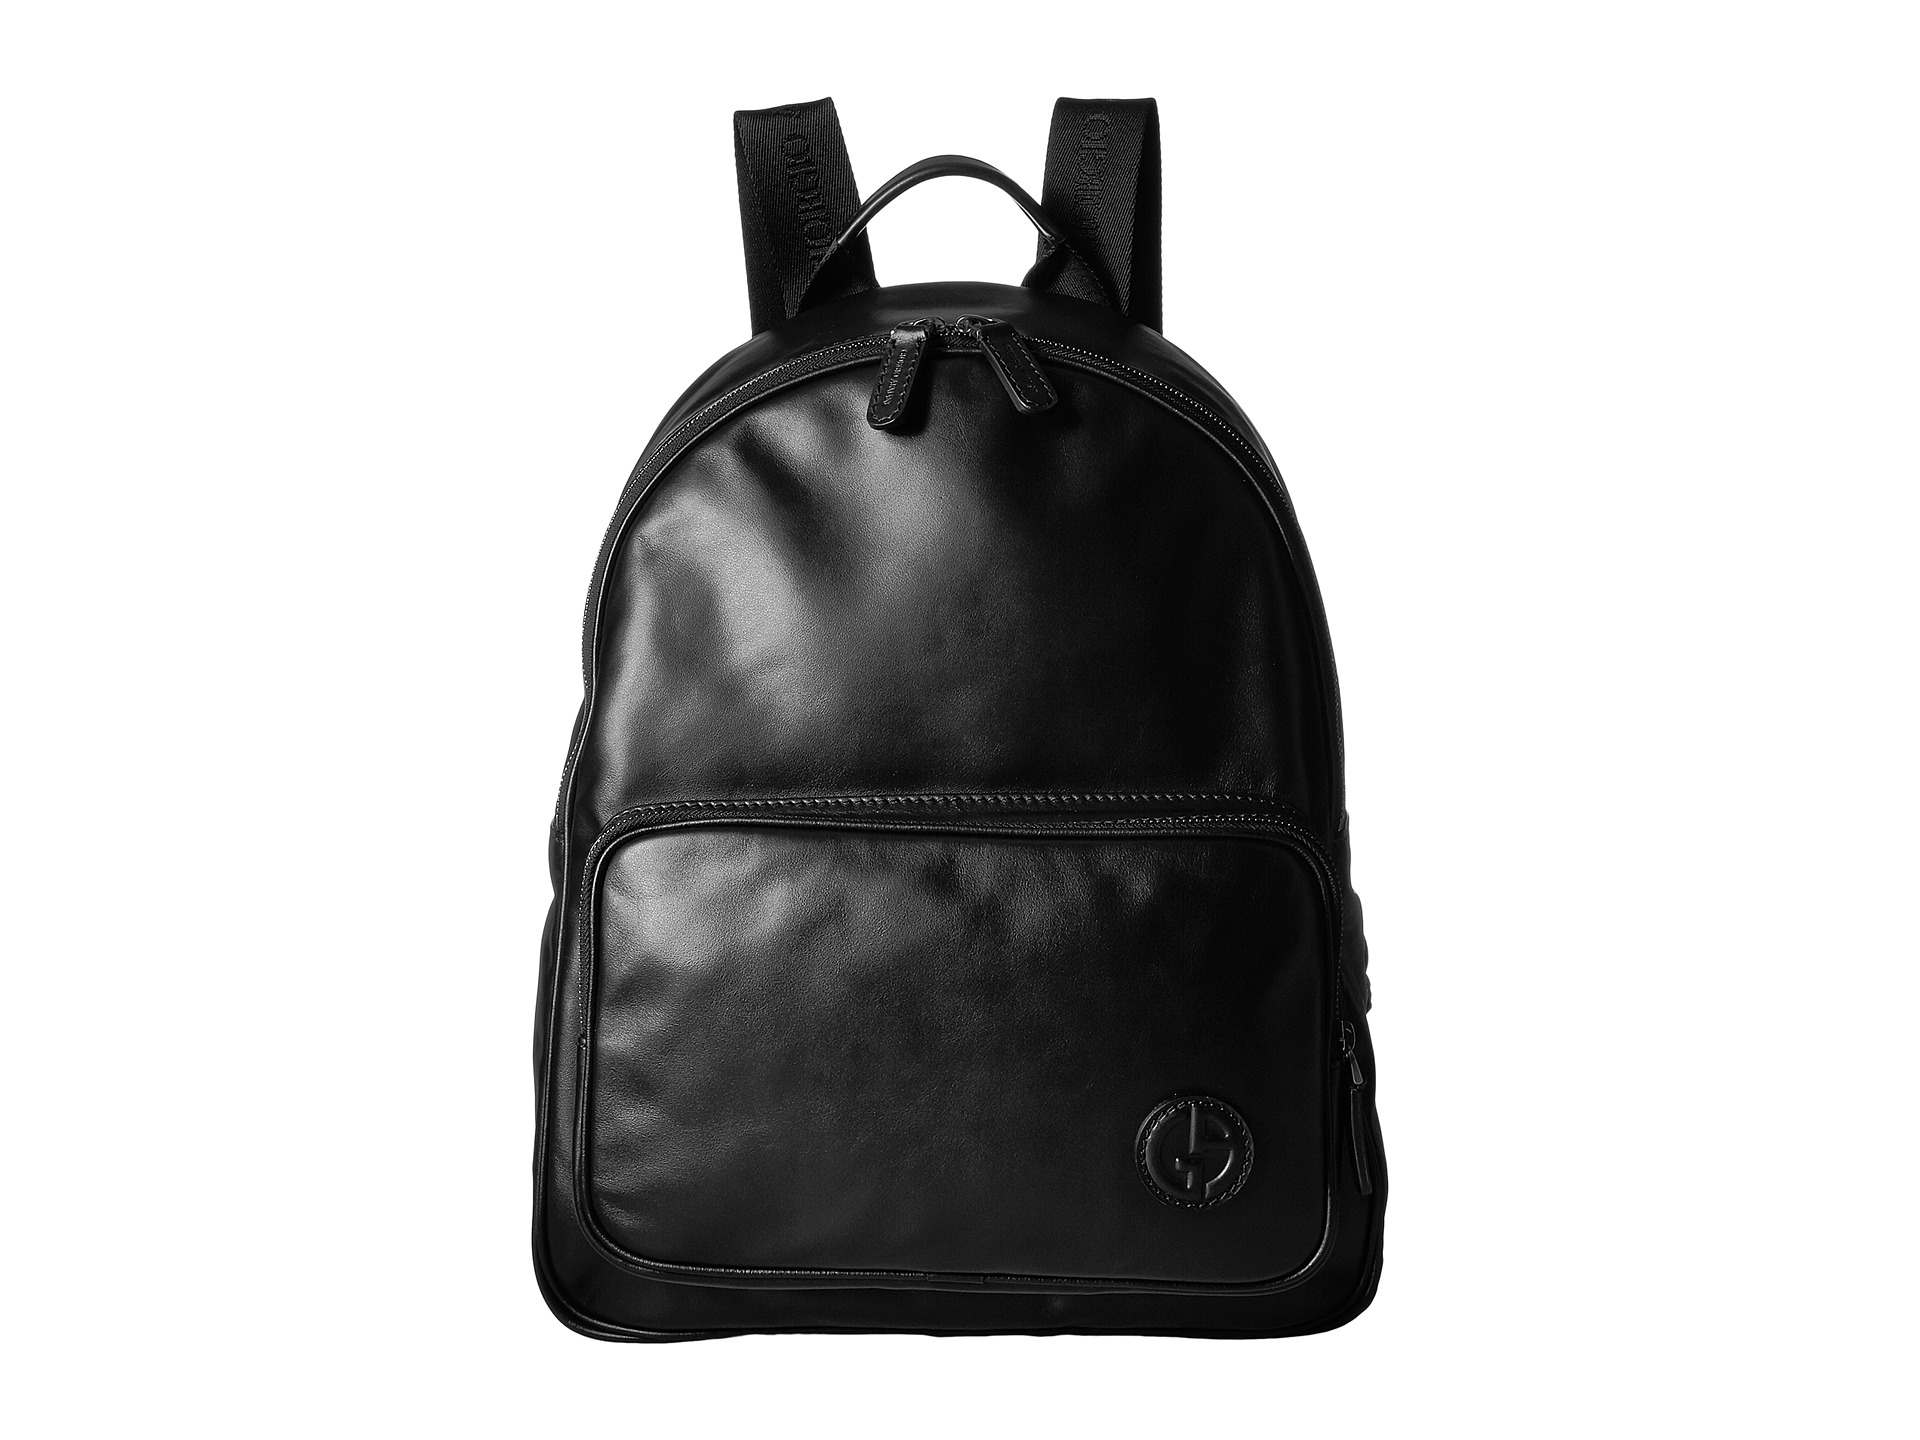 Giorgio Armani Smooth Leather Backpack at Luxury.Zappos.com